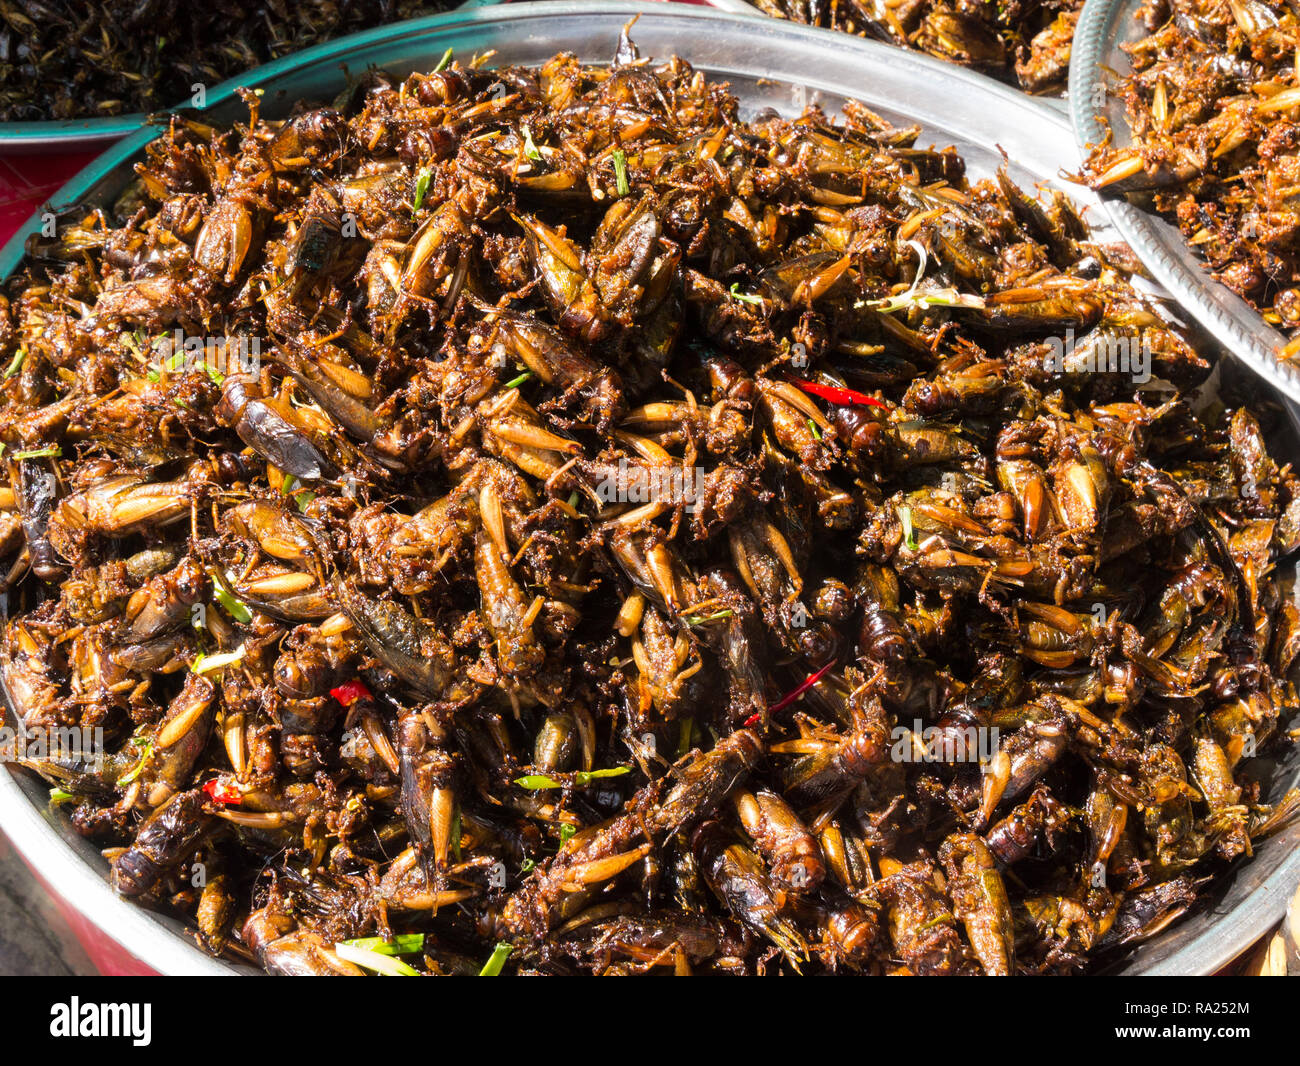 Plate of deep fried locusts for sale in Skuon Town market Internationally rekown market Cambodia Asia also known as Spider Village Stock Photo